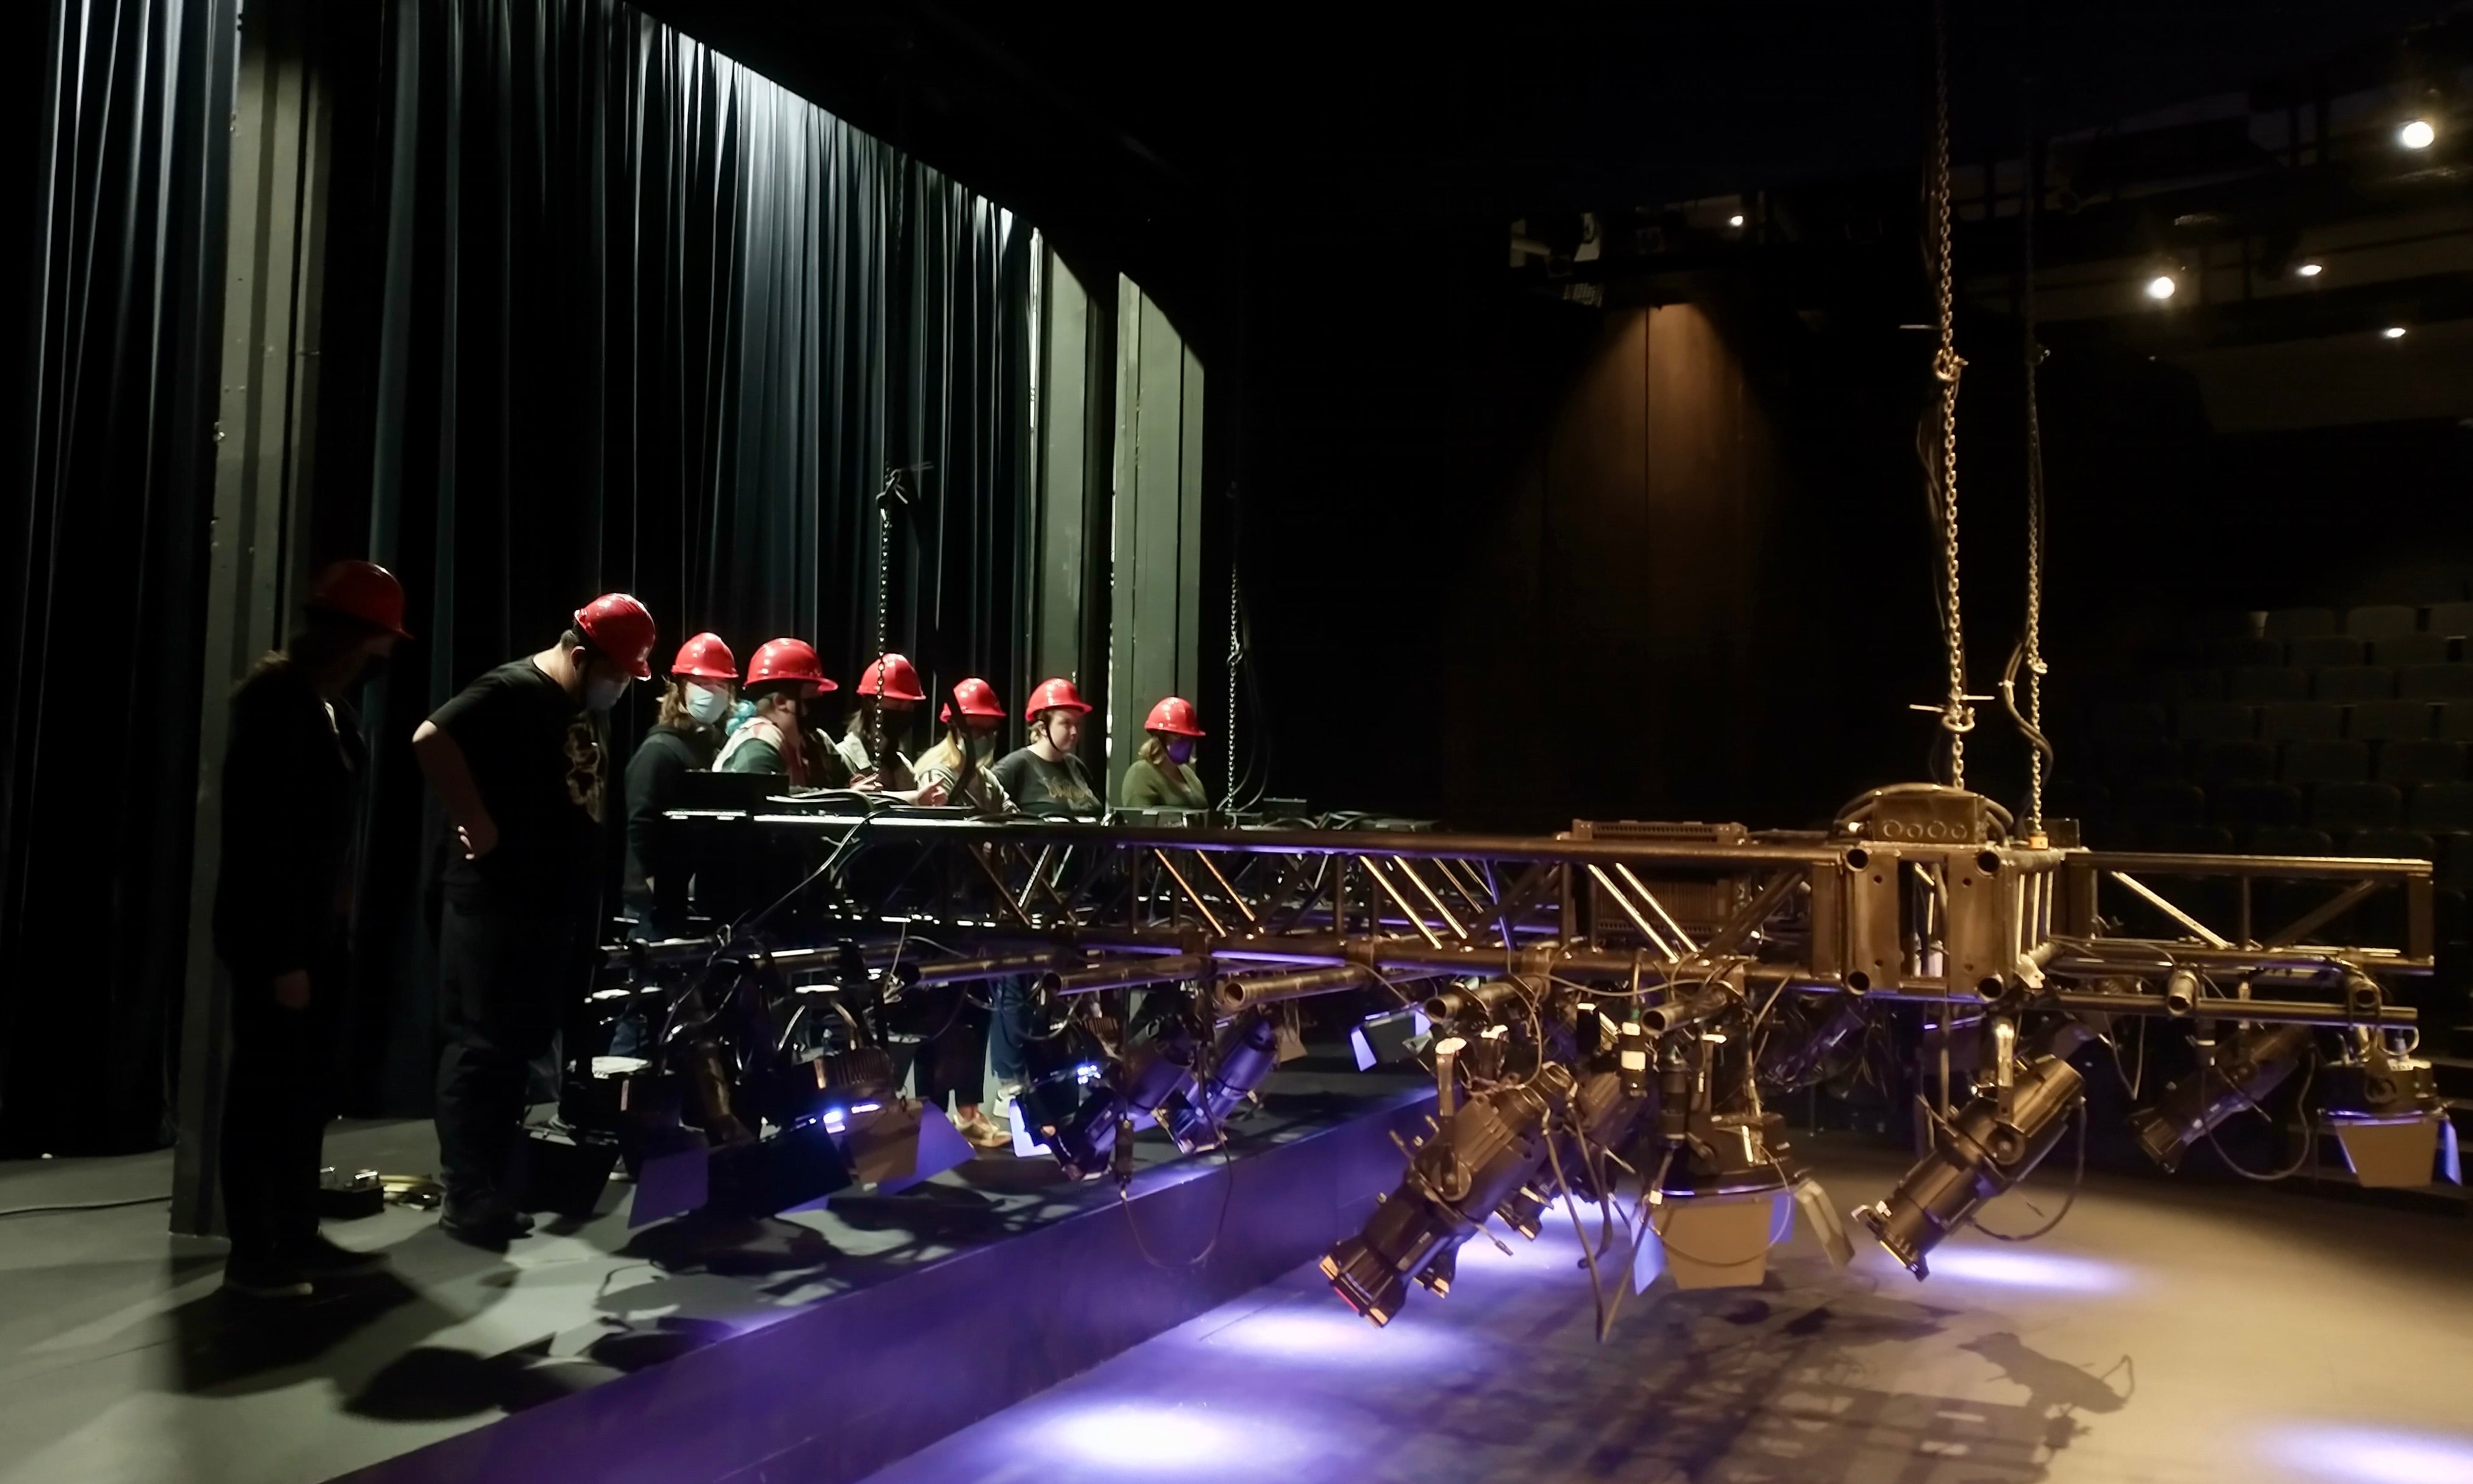 Row of students in hardhat raising the stage lighting grid